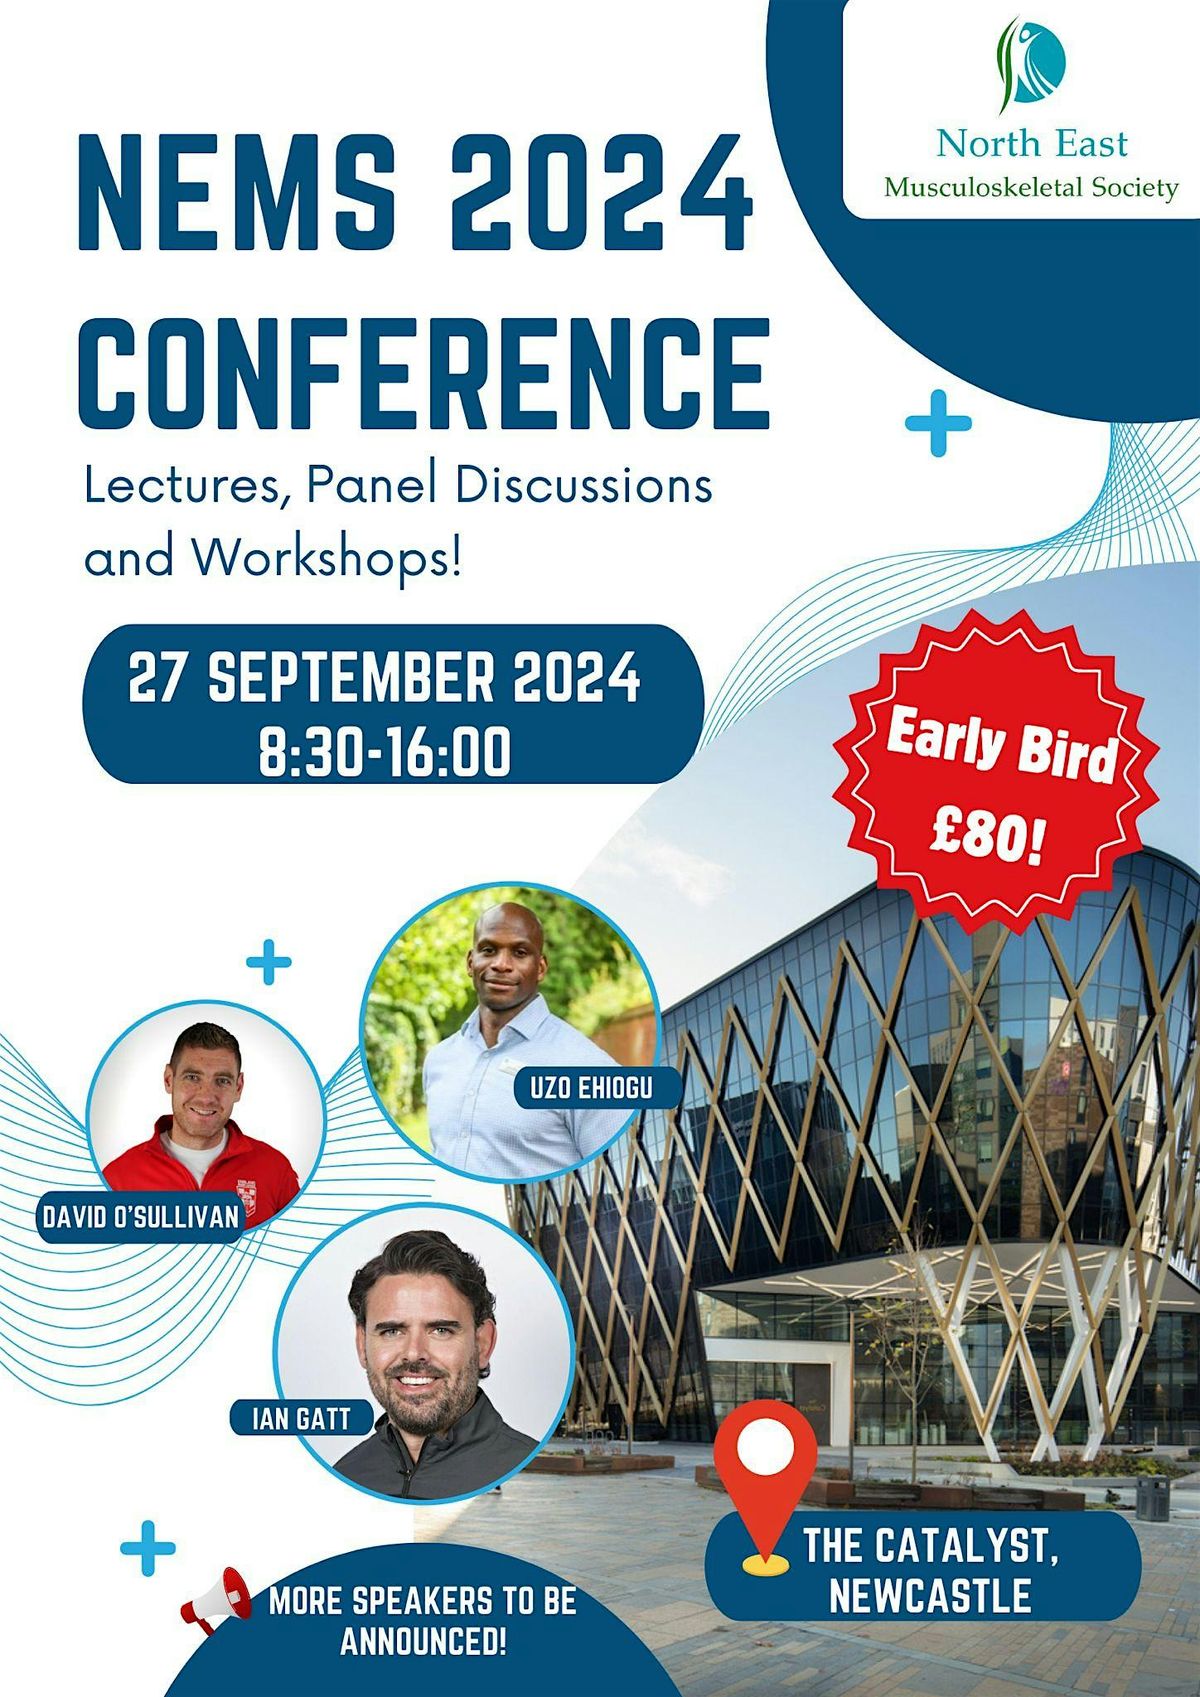 North East MSK Society Conference: Sept 2024